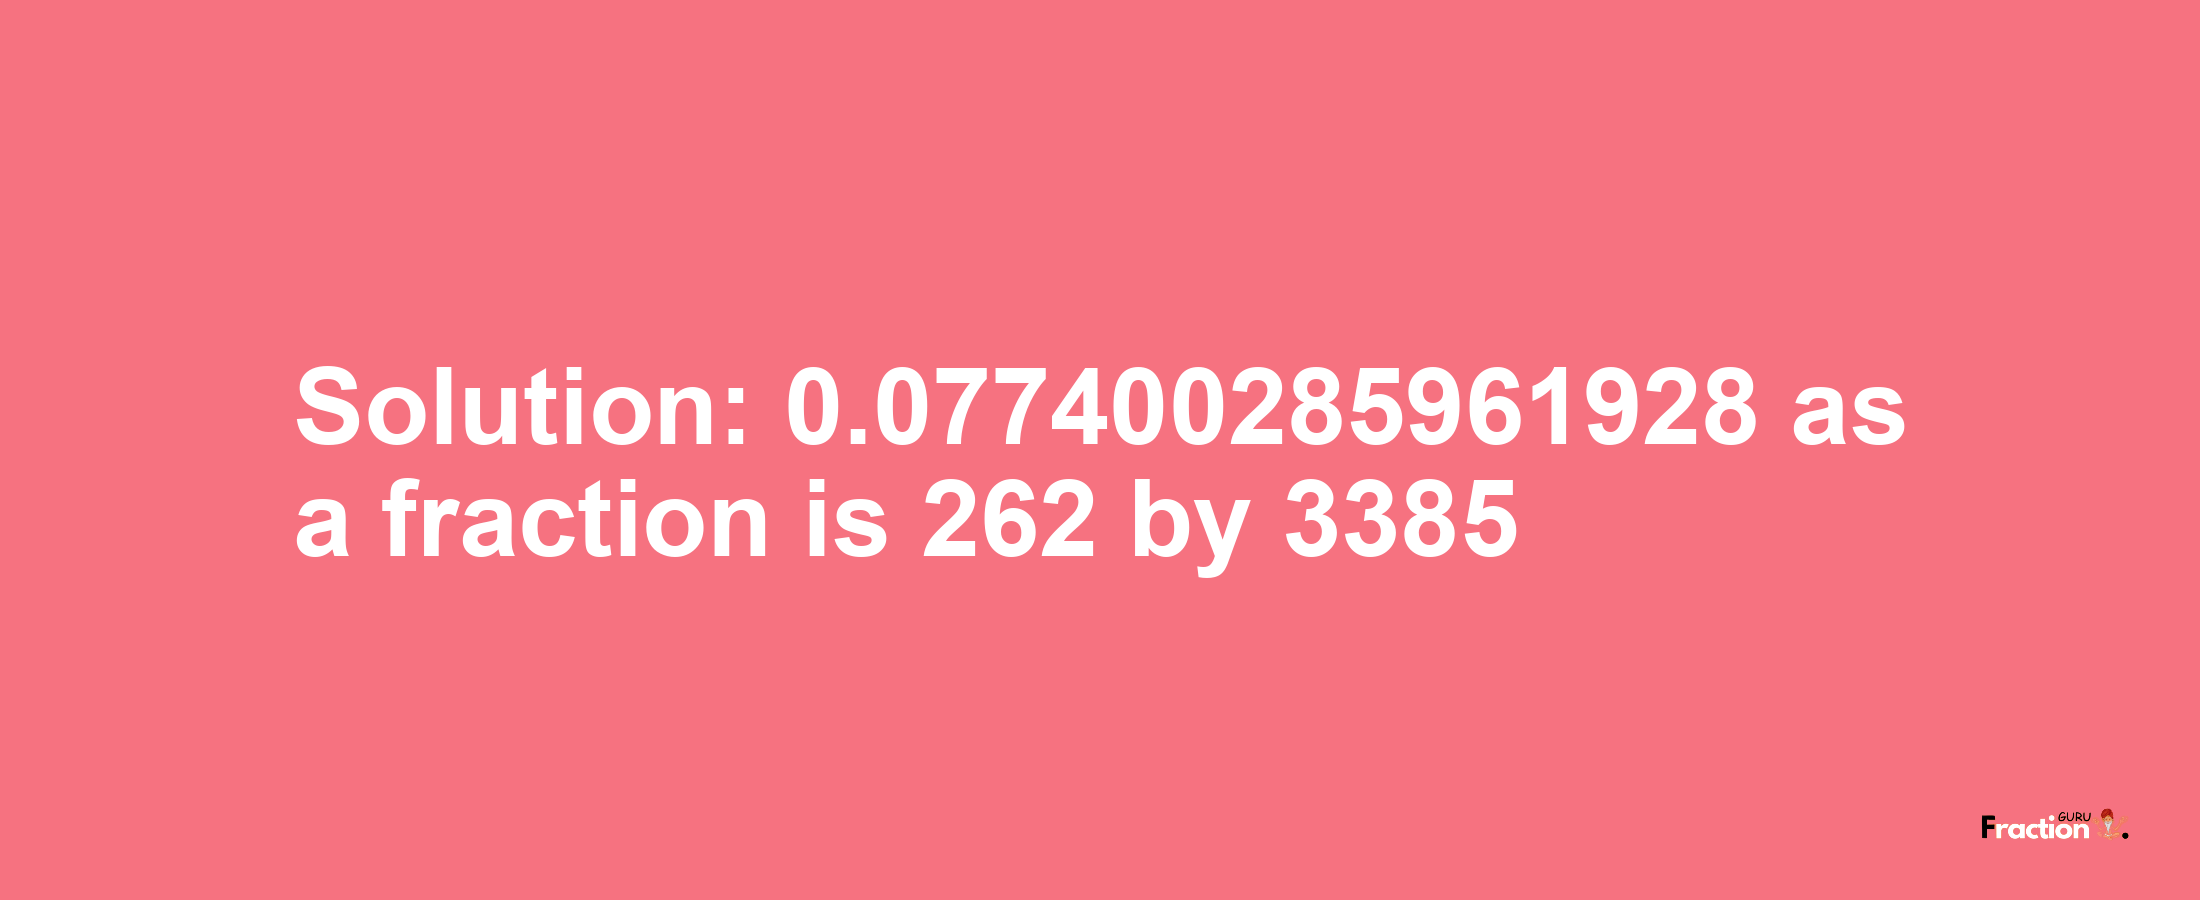 Solution:0.077400285961928 as a fraction is 262/3385